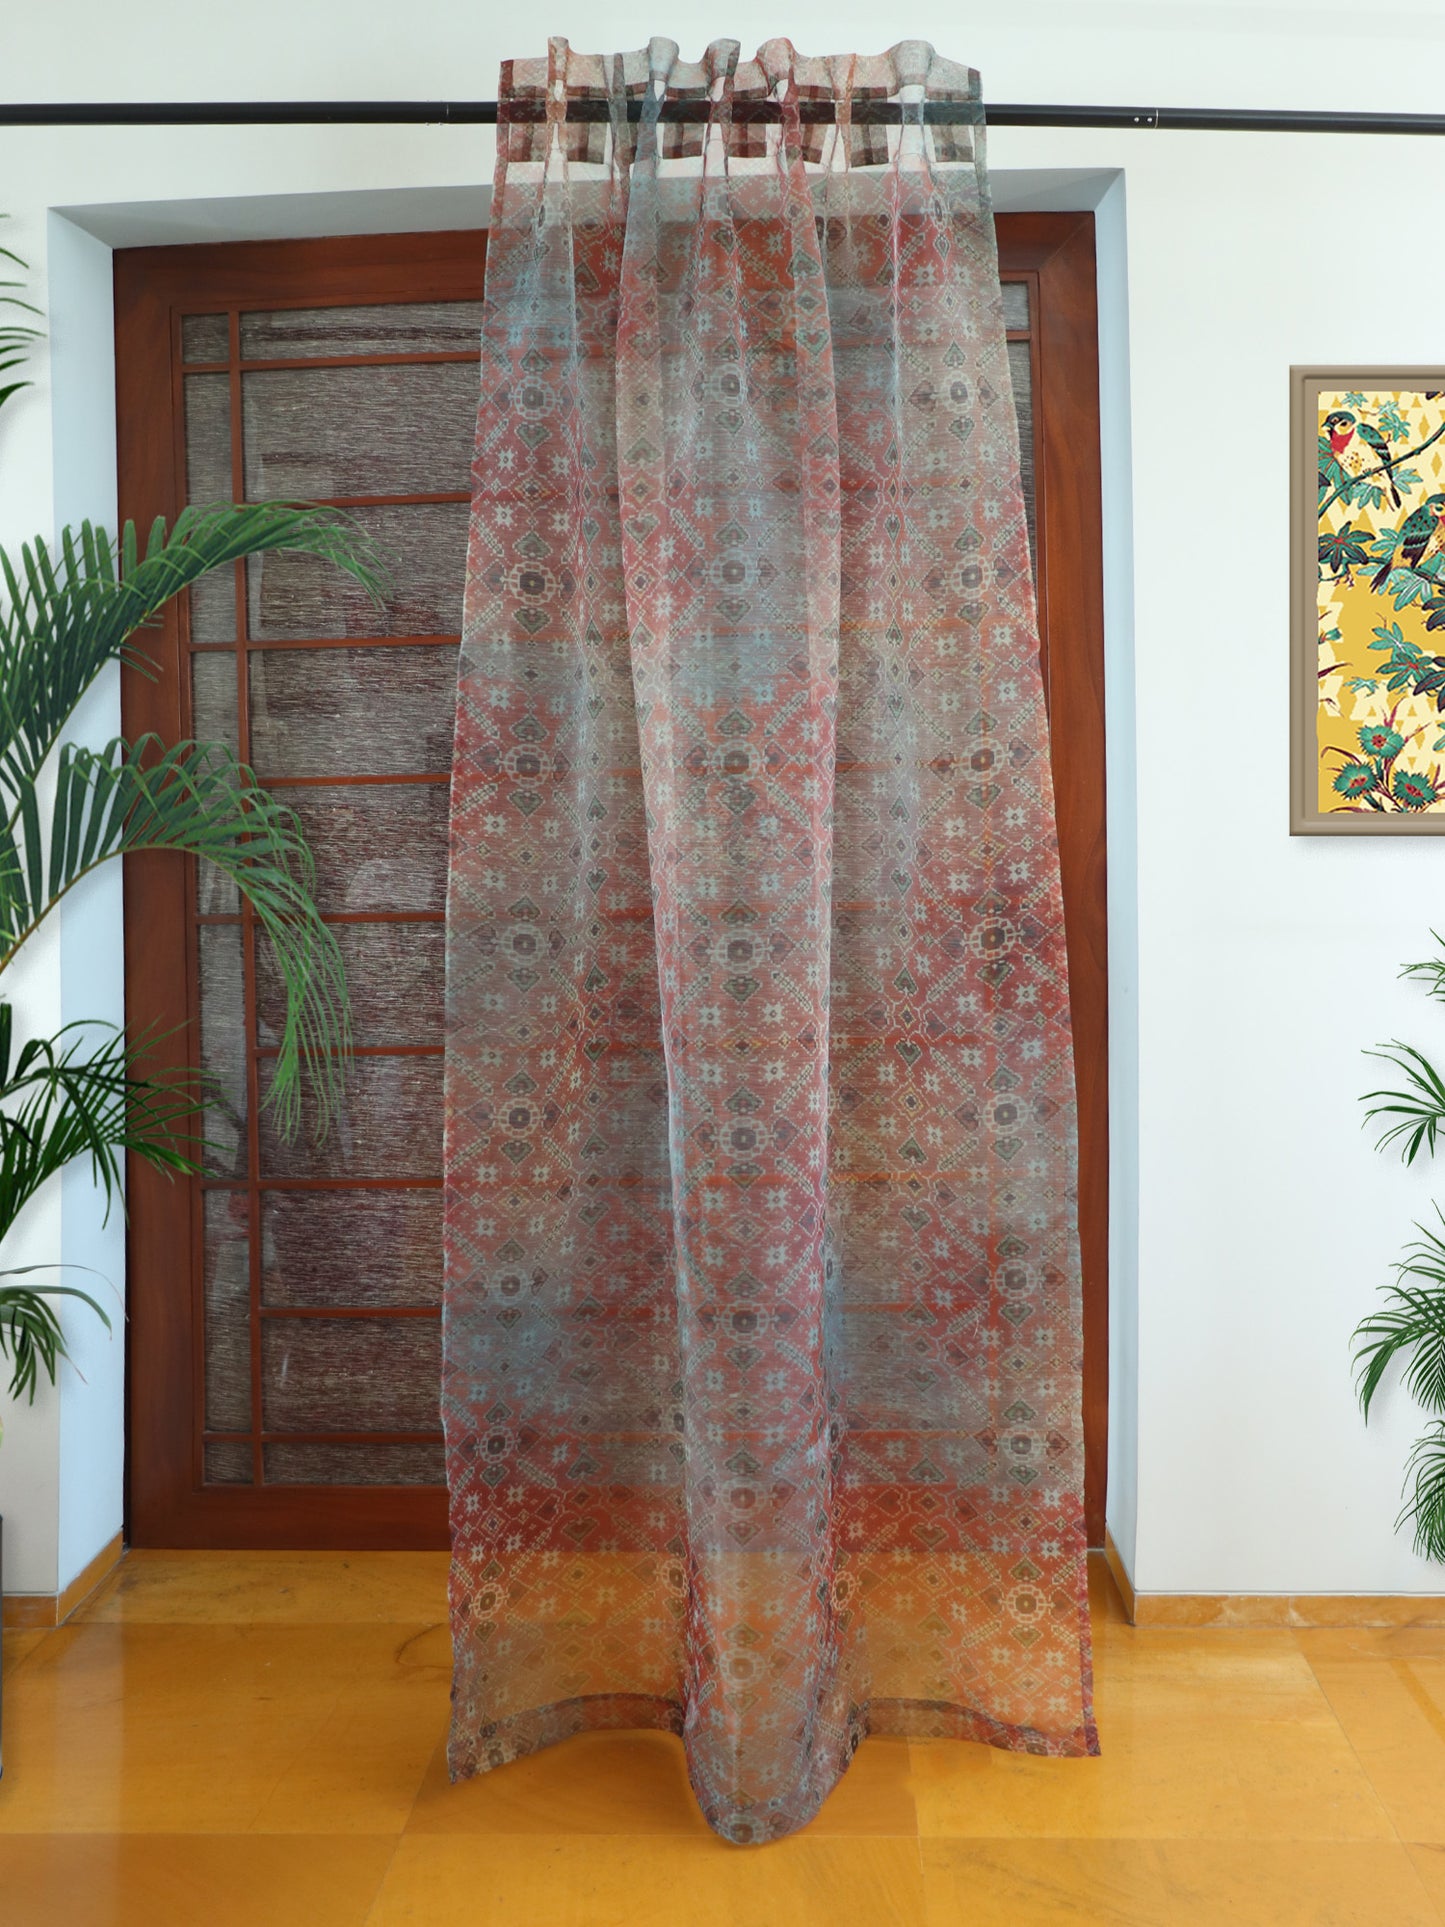 Transparent Organza Sheer Curtain for Door | Bedroom and Living Room | Soft and Light Weight | Abstract Printed with Hidden Loop in Multicolor - 50x80 inches (7feet Long) (Pack of 1)